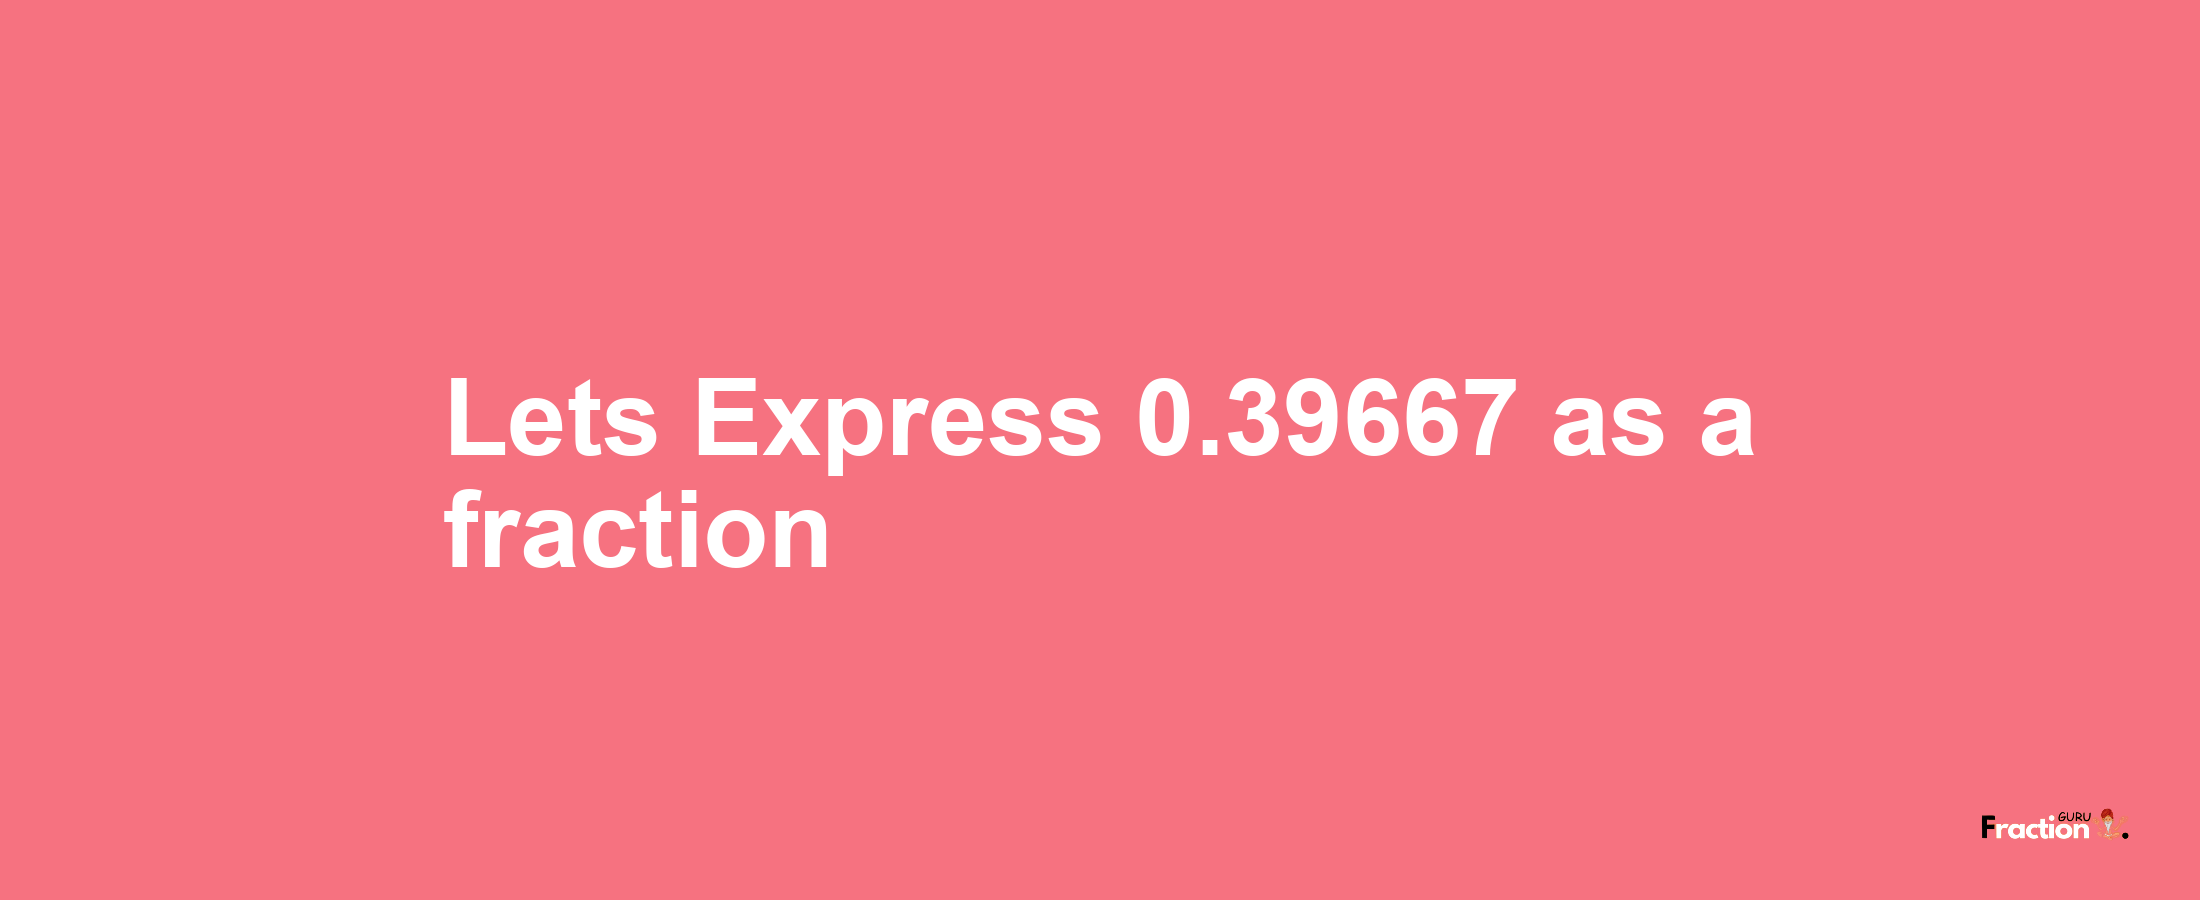 Lets Express 0.39667 as afraction